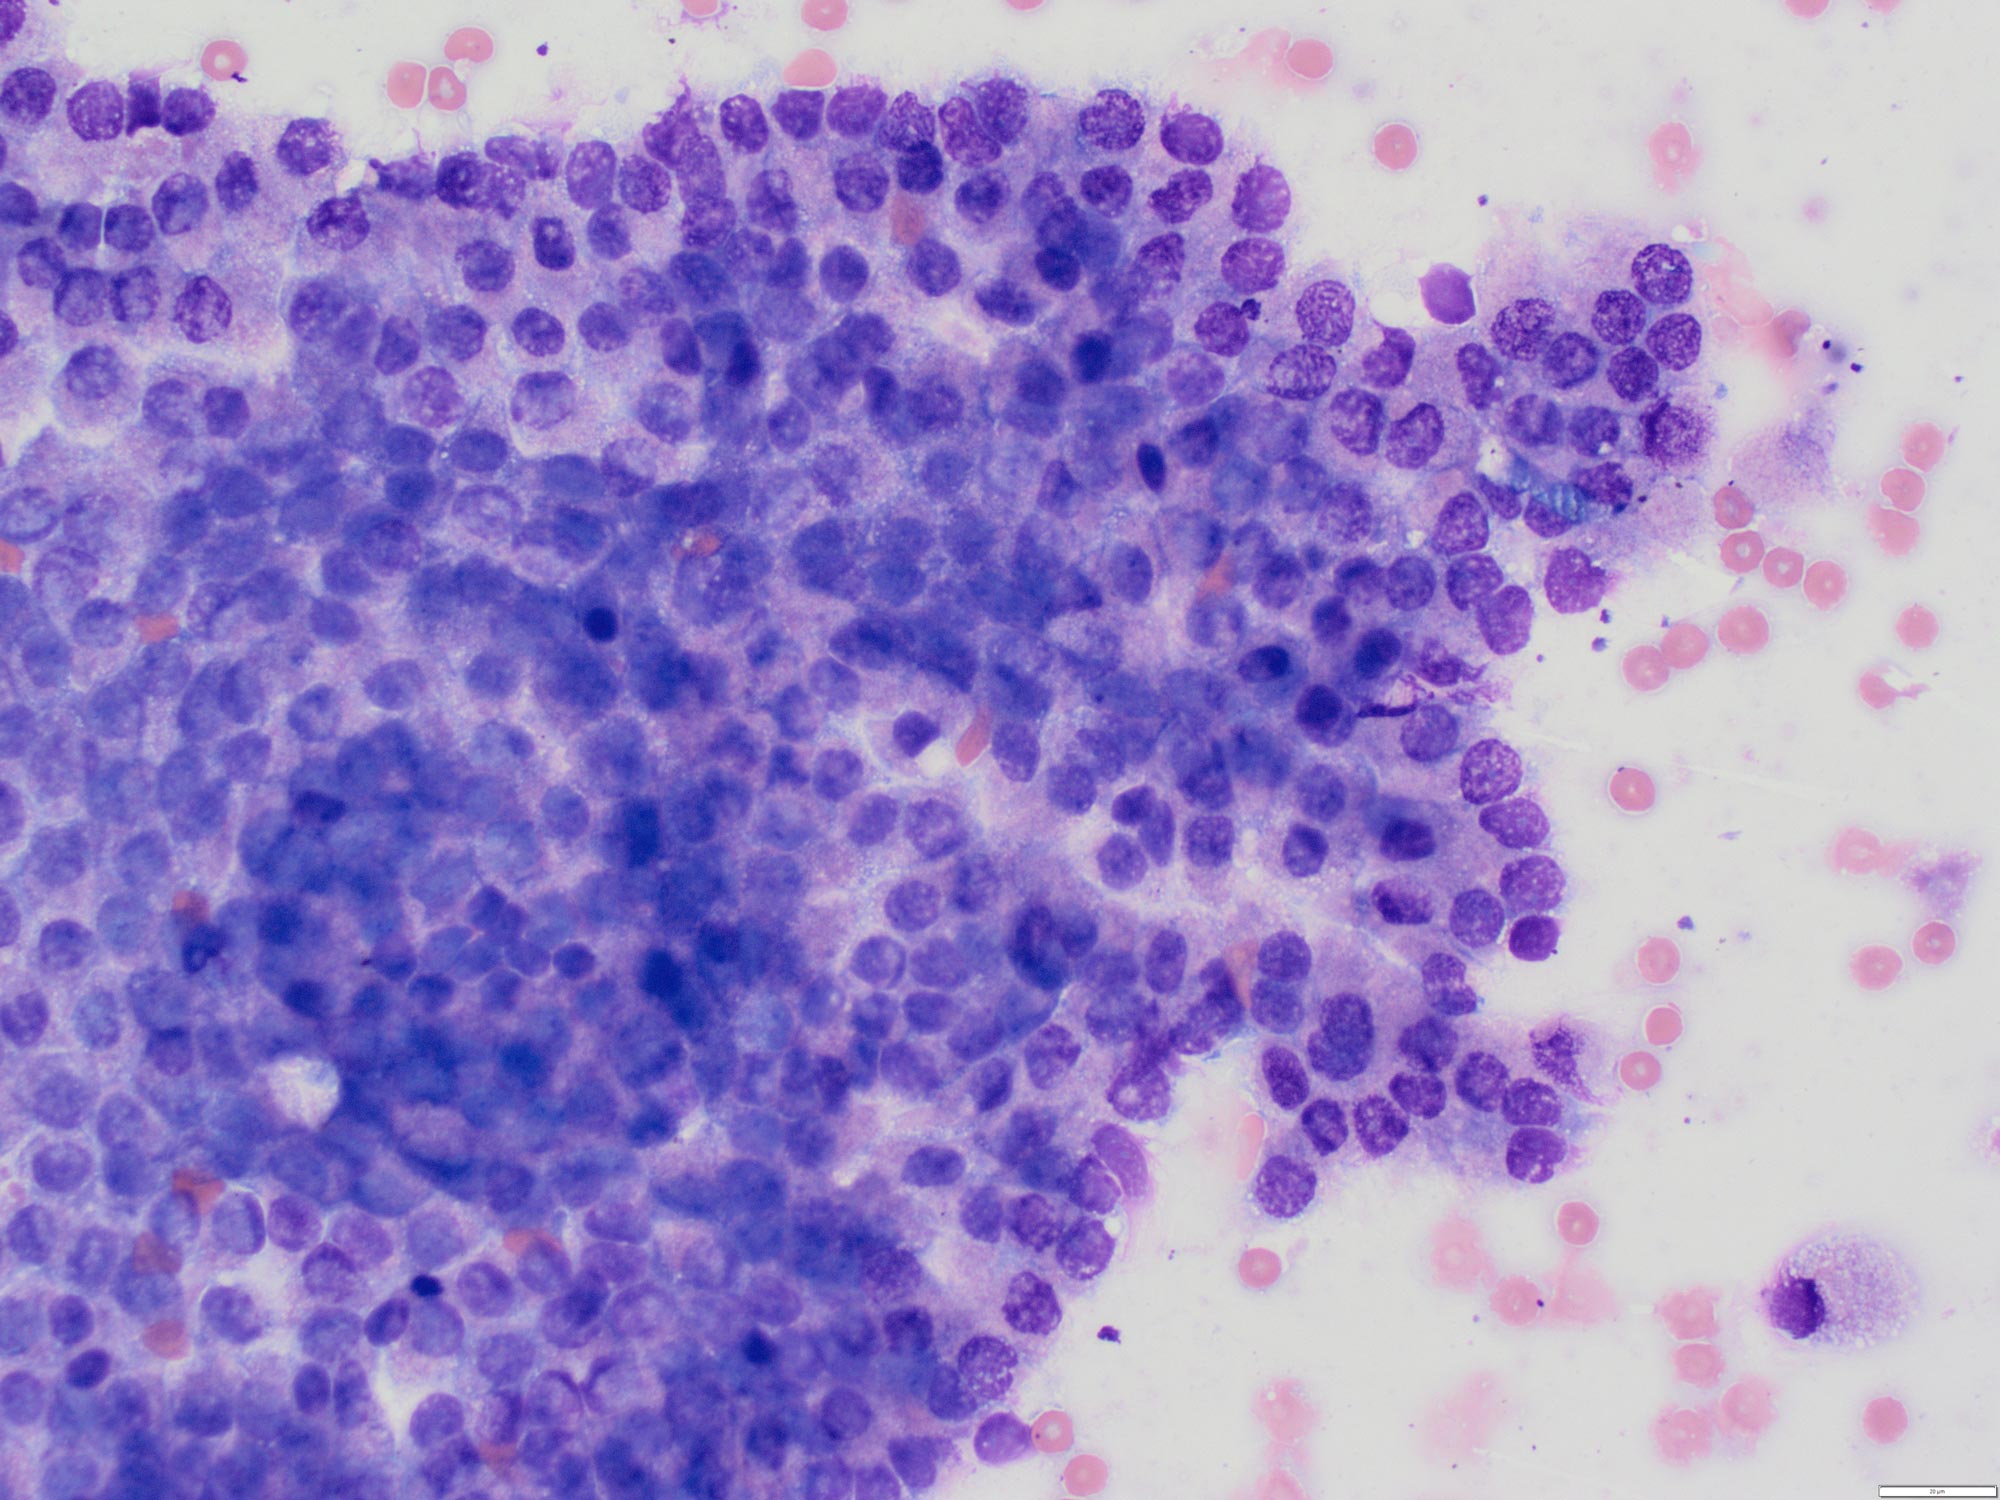 Normal prostate epithelium (500× magnification) showing “honeycomb” pattern.